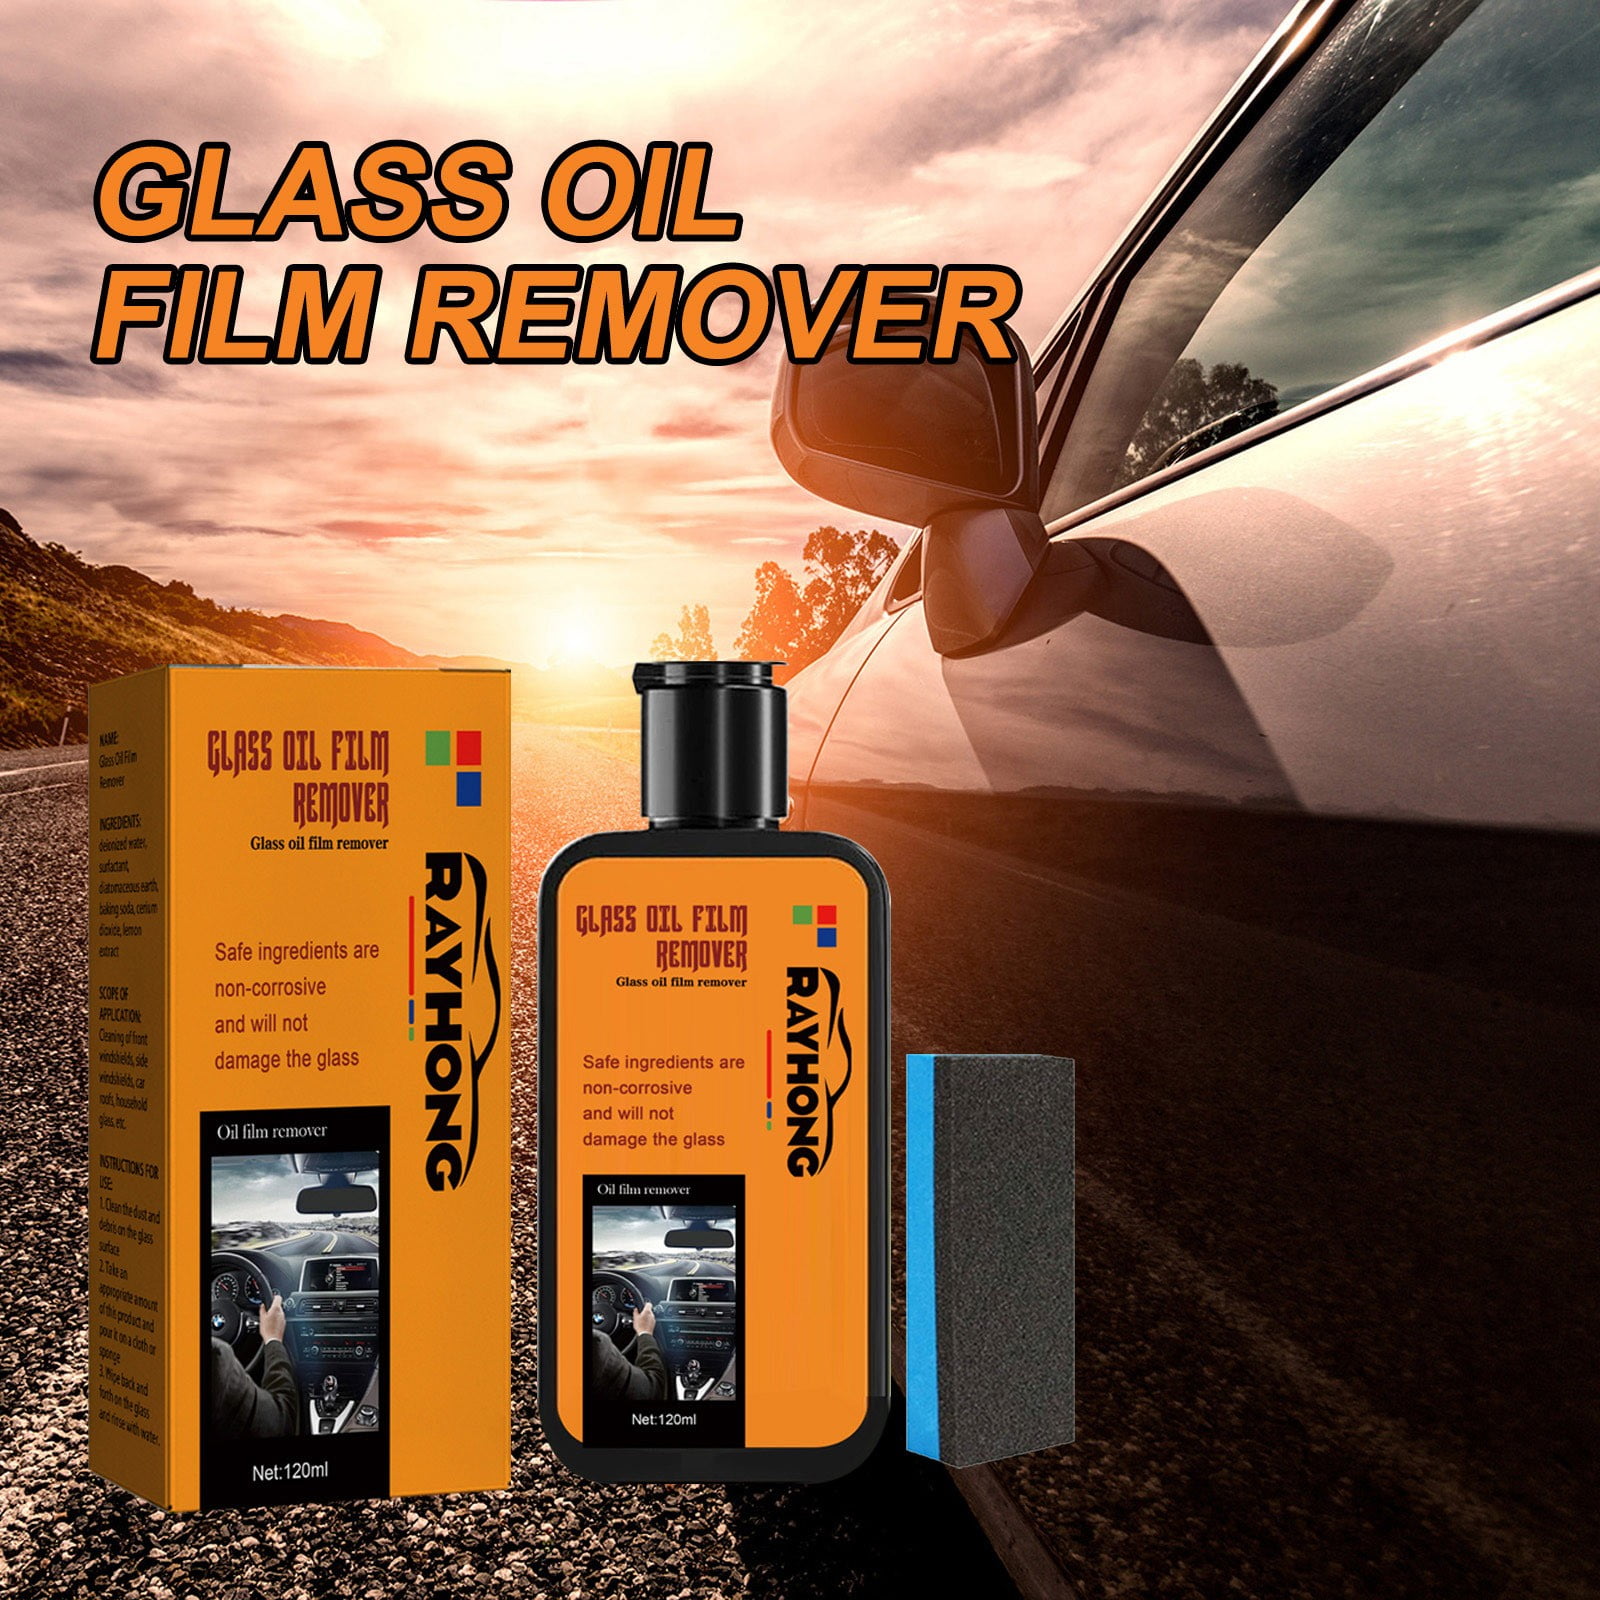 Glass Oil Film Cleaner Window Film Remover 120ml Tree Sap Remover For Car  Car Windshield Cleaner For Home And Auto Windows - AliExpress